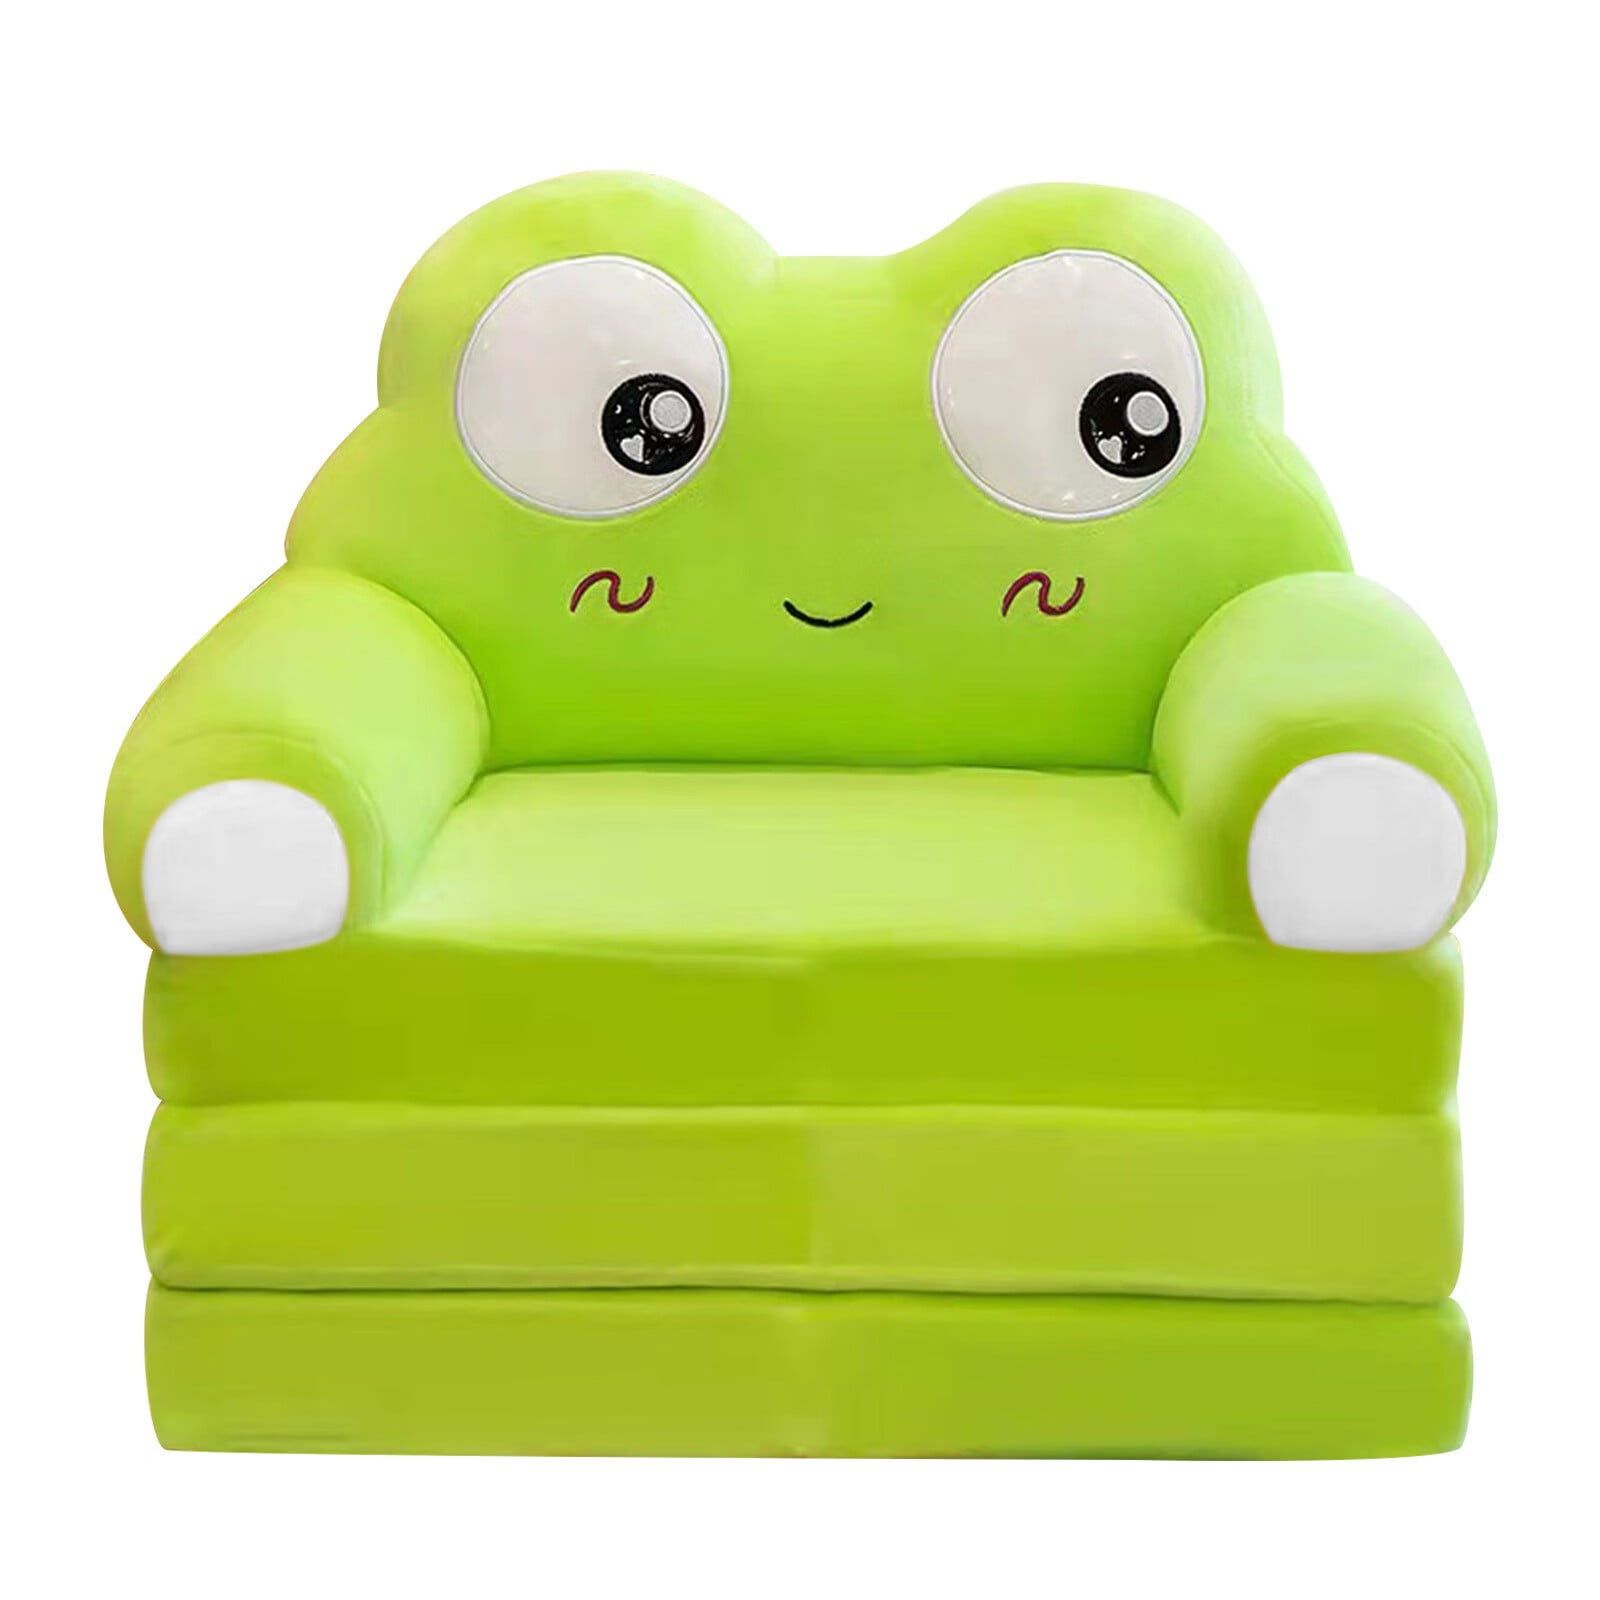 Plush Foldable Kids Sofa Backrest Armchair 2 In 1 Foldable Children Inside 2 In 1 Foldable Children's Sofa Beds (View 16 of 20)